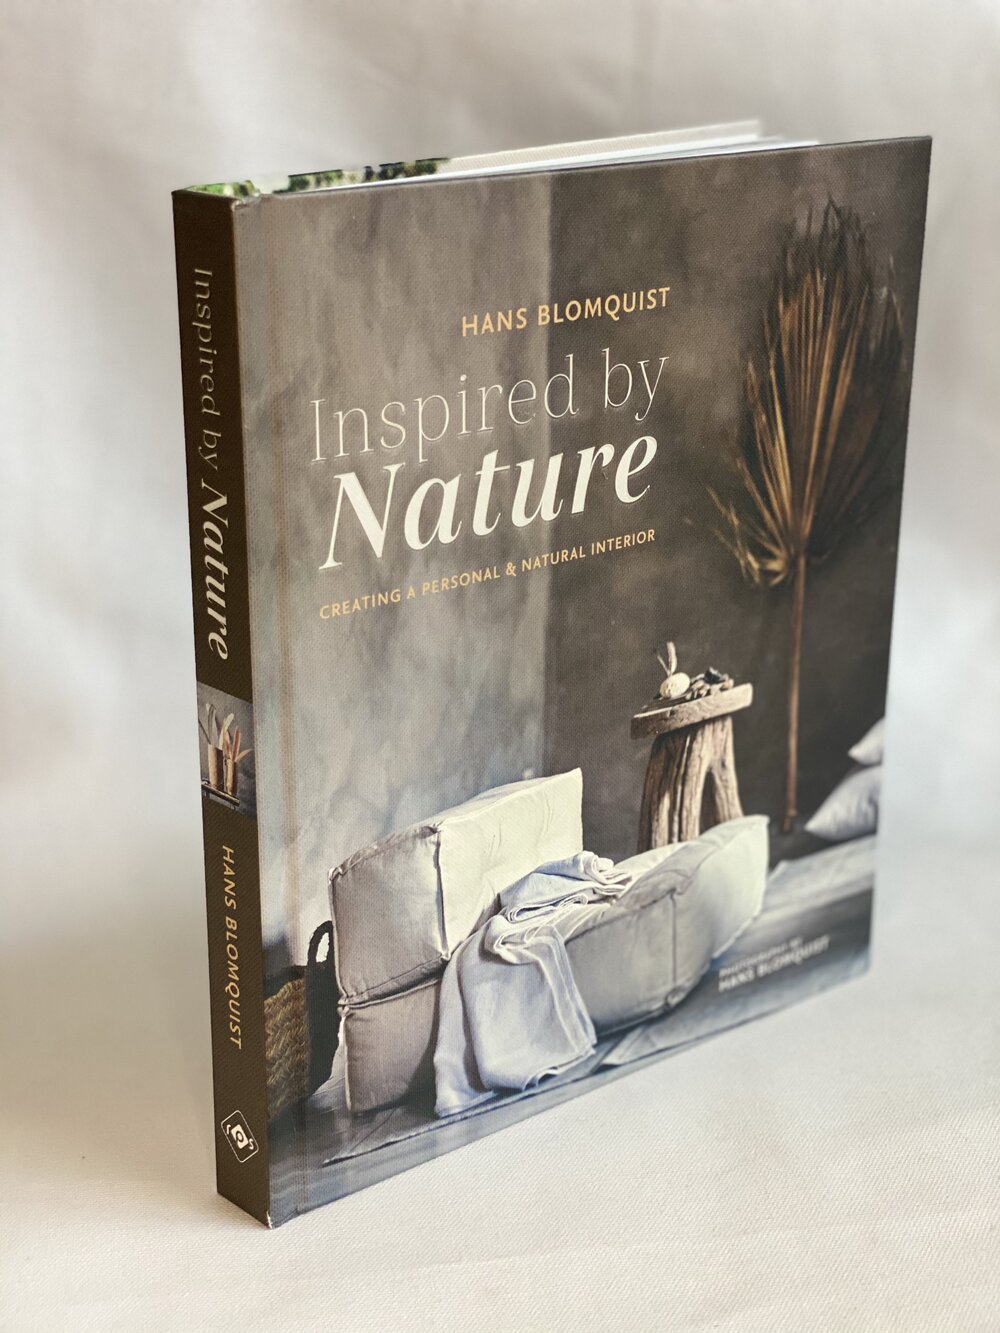 Shop Inspired By Nature: Creating a personal and natural interior from Redefine Designs Co. on Openhaus